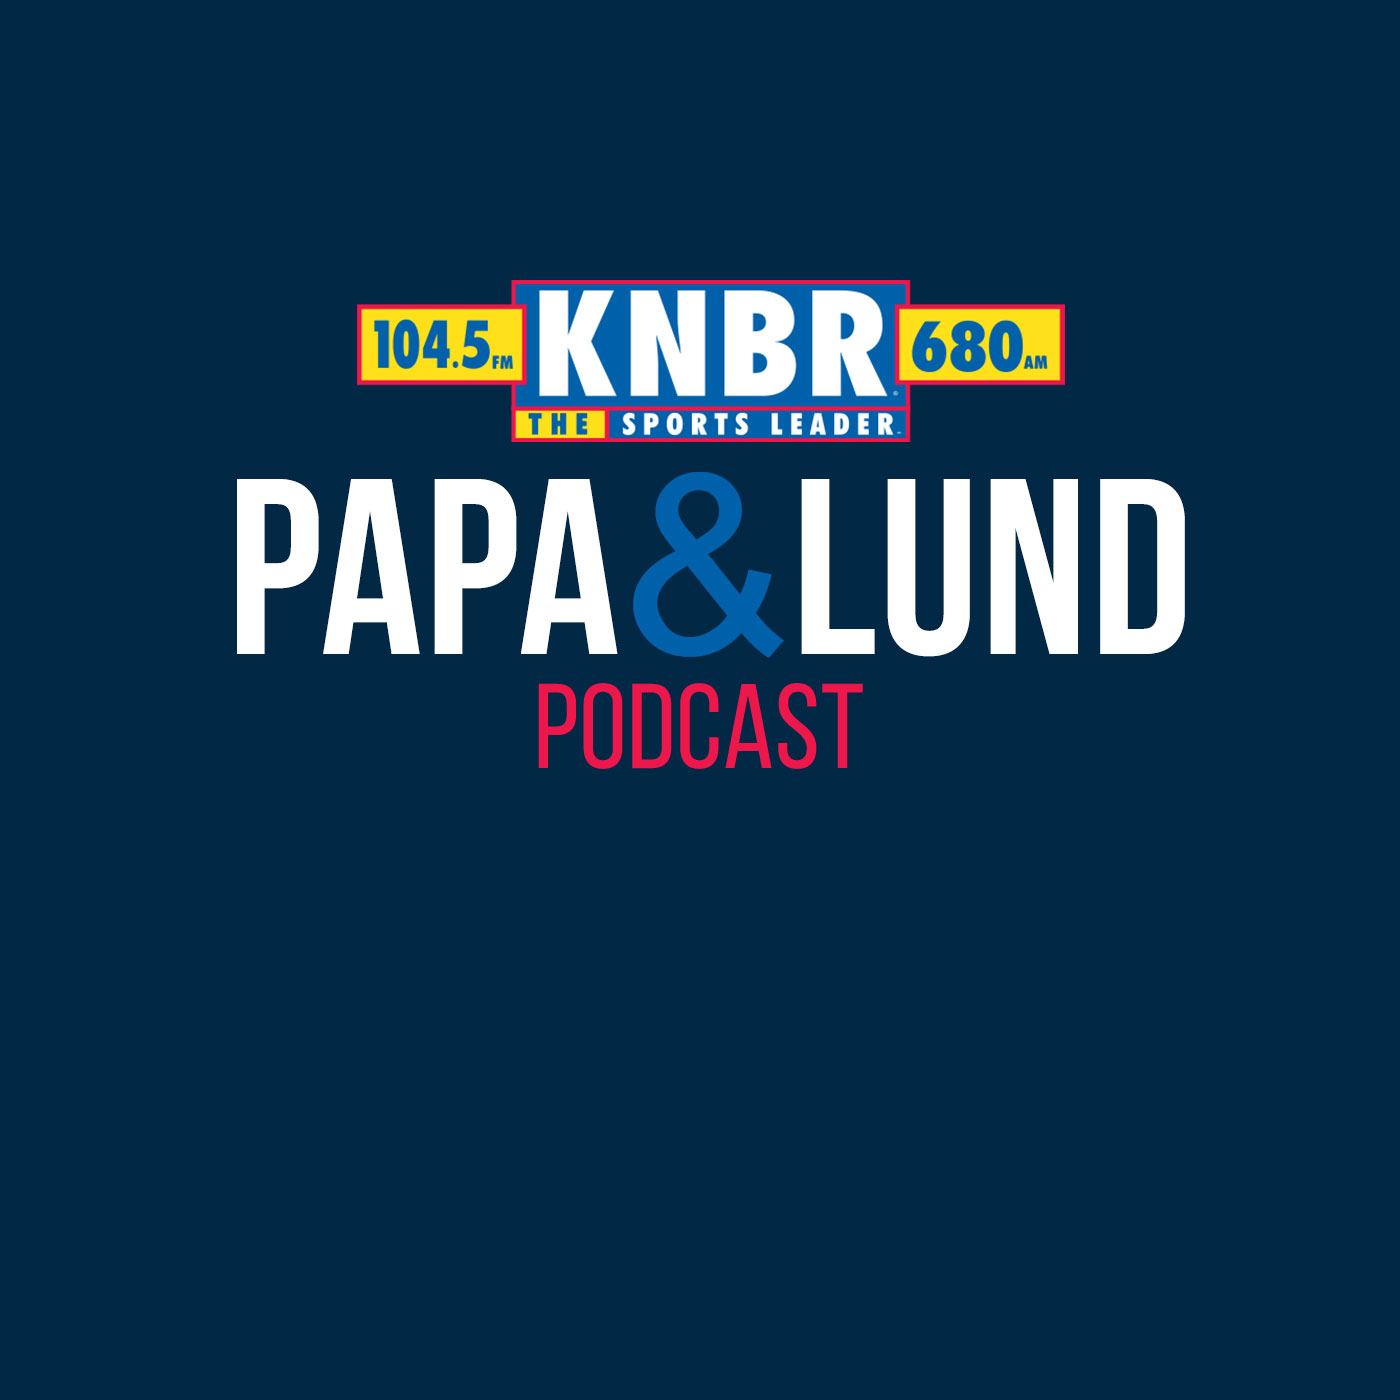 6-14 Kirk Rueter joins Papa & Lund and reminisces about the 2002 World Series against the Angels